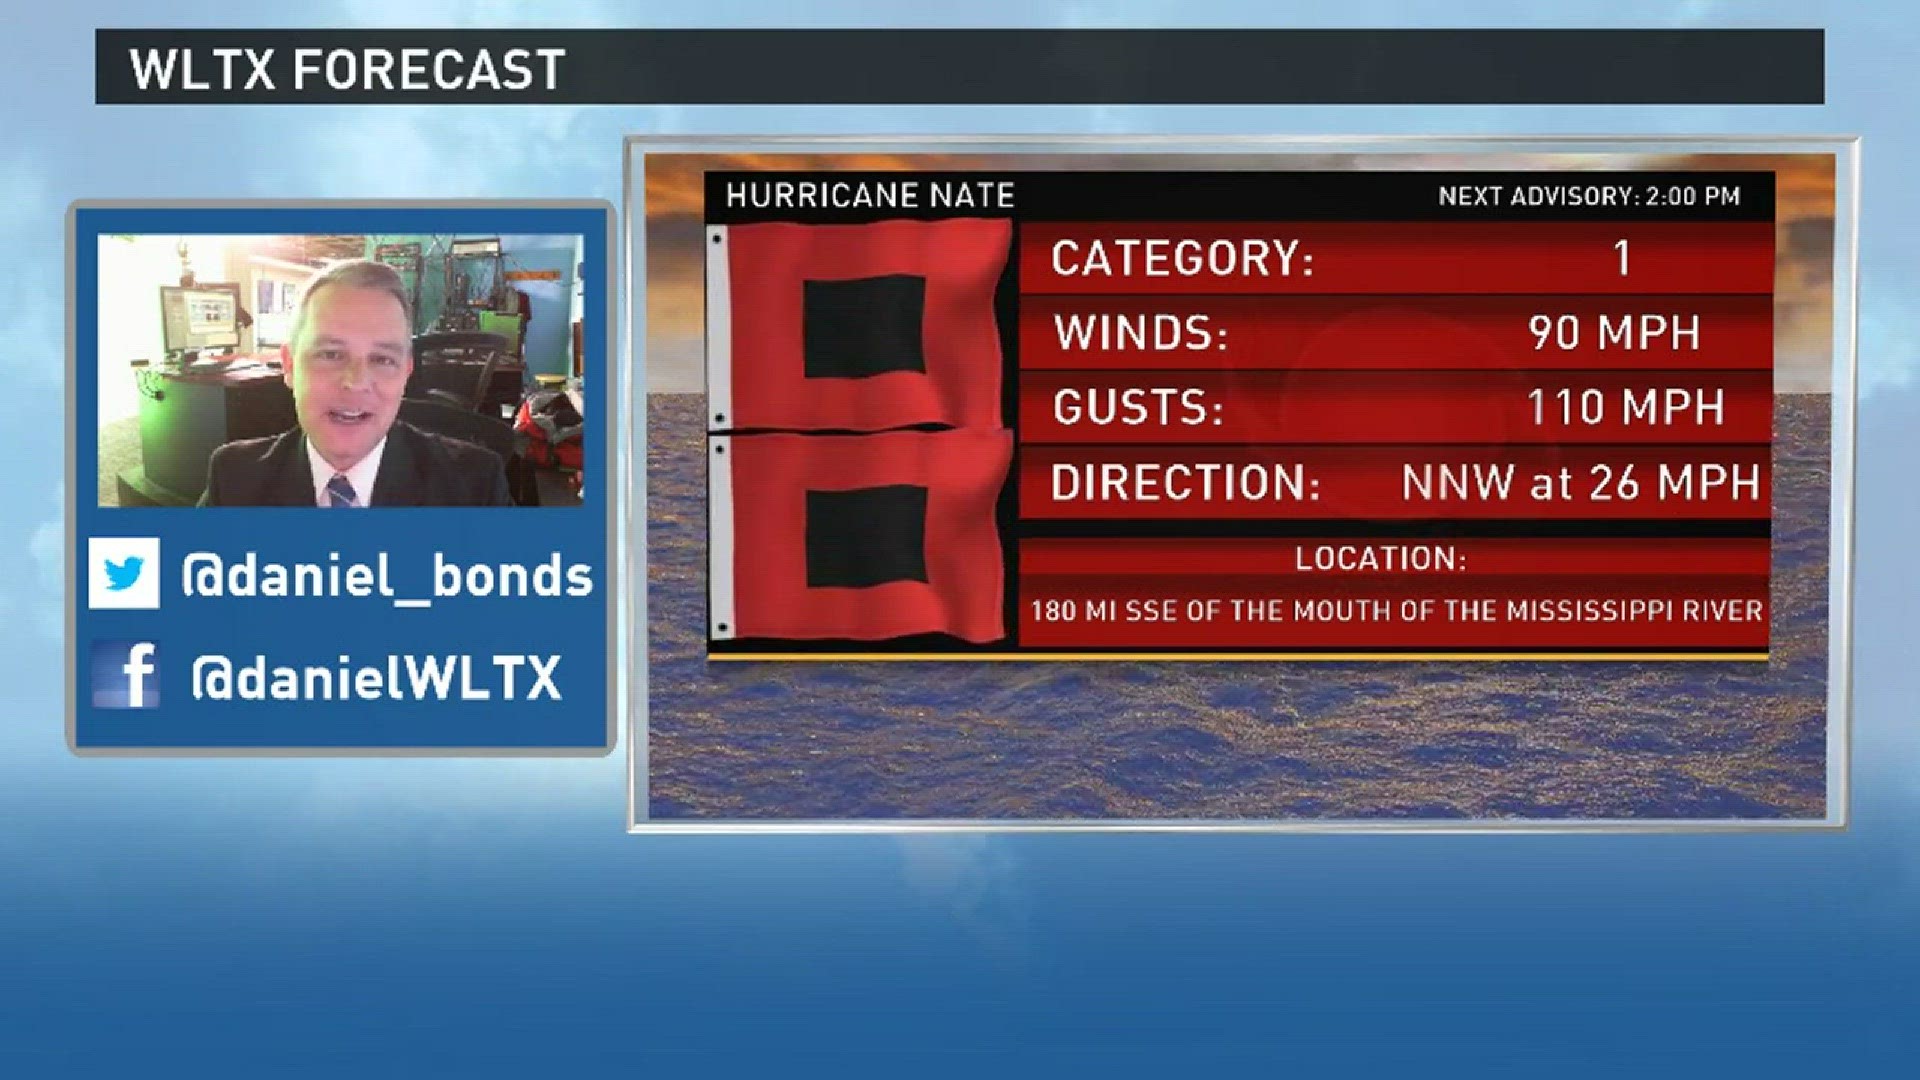 Here is the forecast for Hurricane Nate